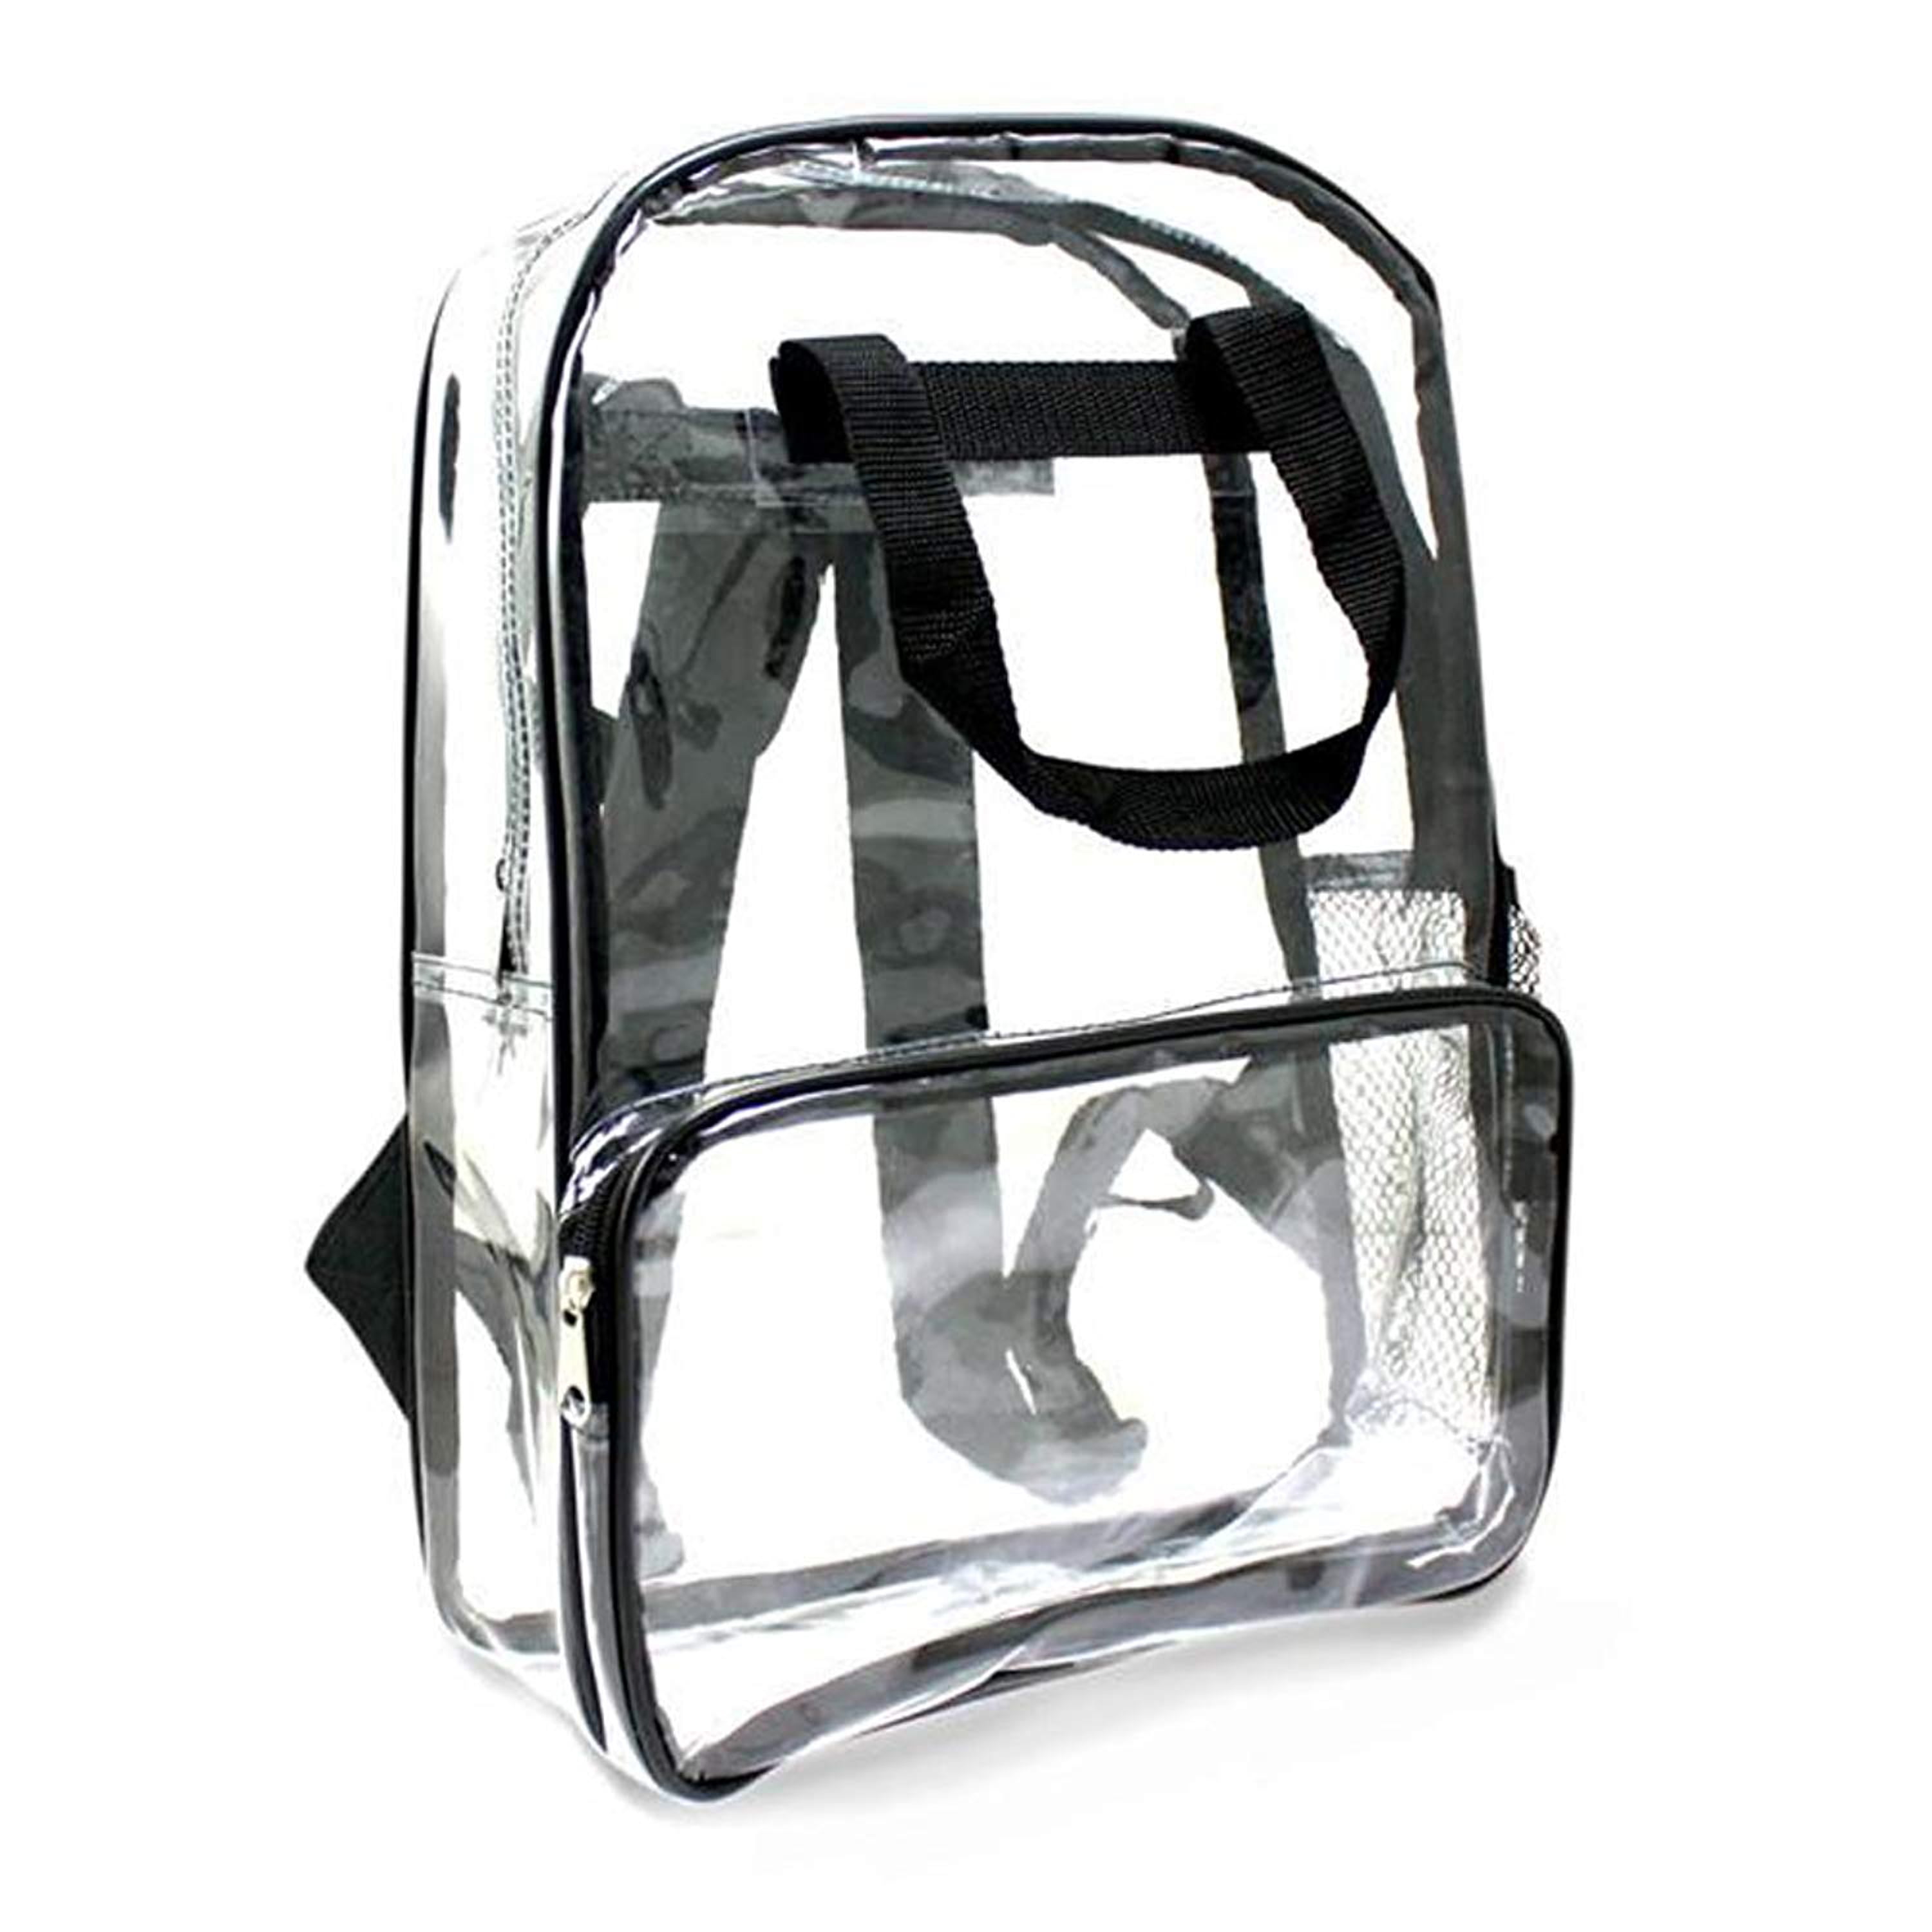 ImpecGear - Clear Backpack Camping Hiking Daypacks NFL Sports Events ...